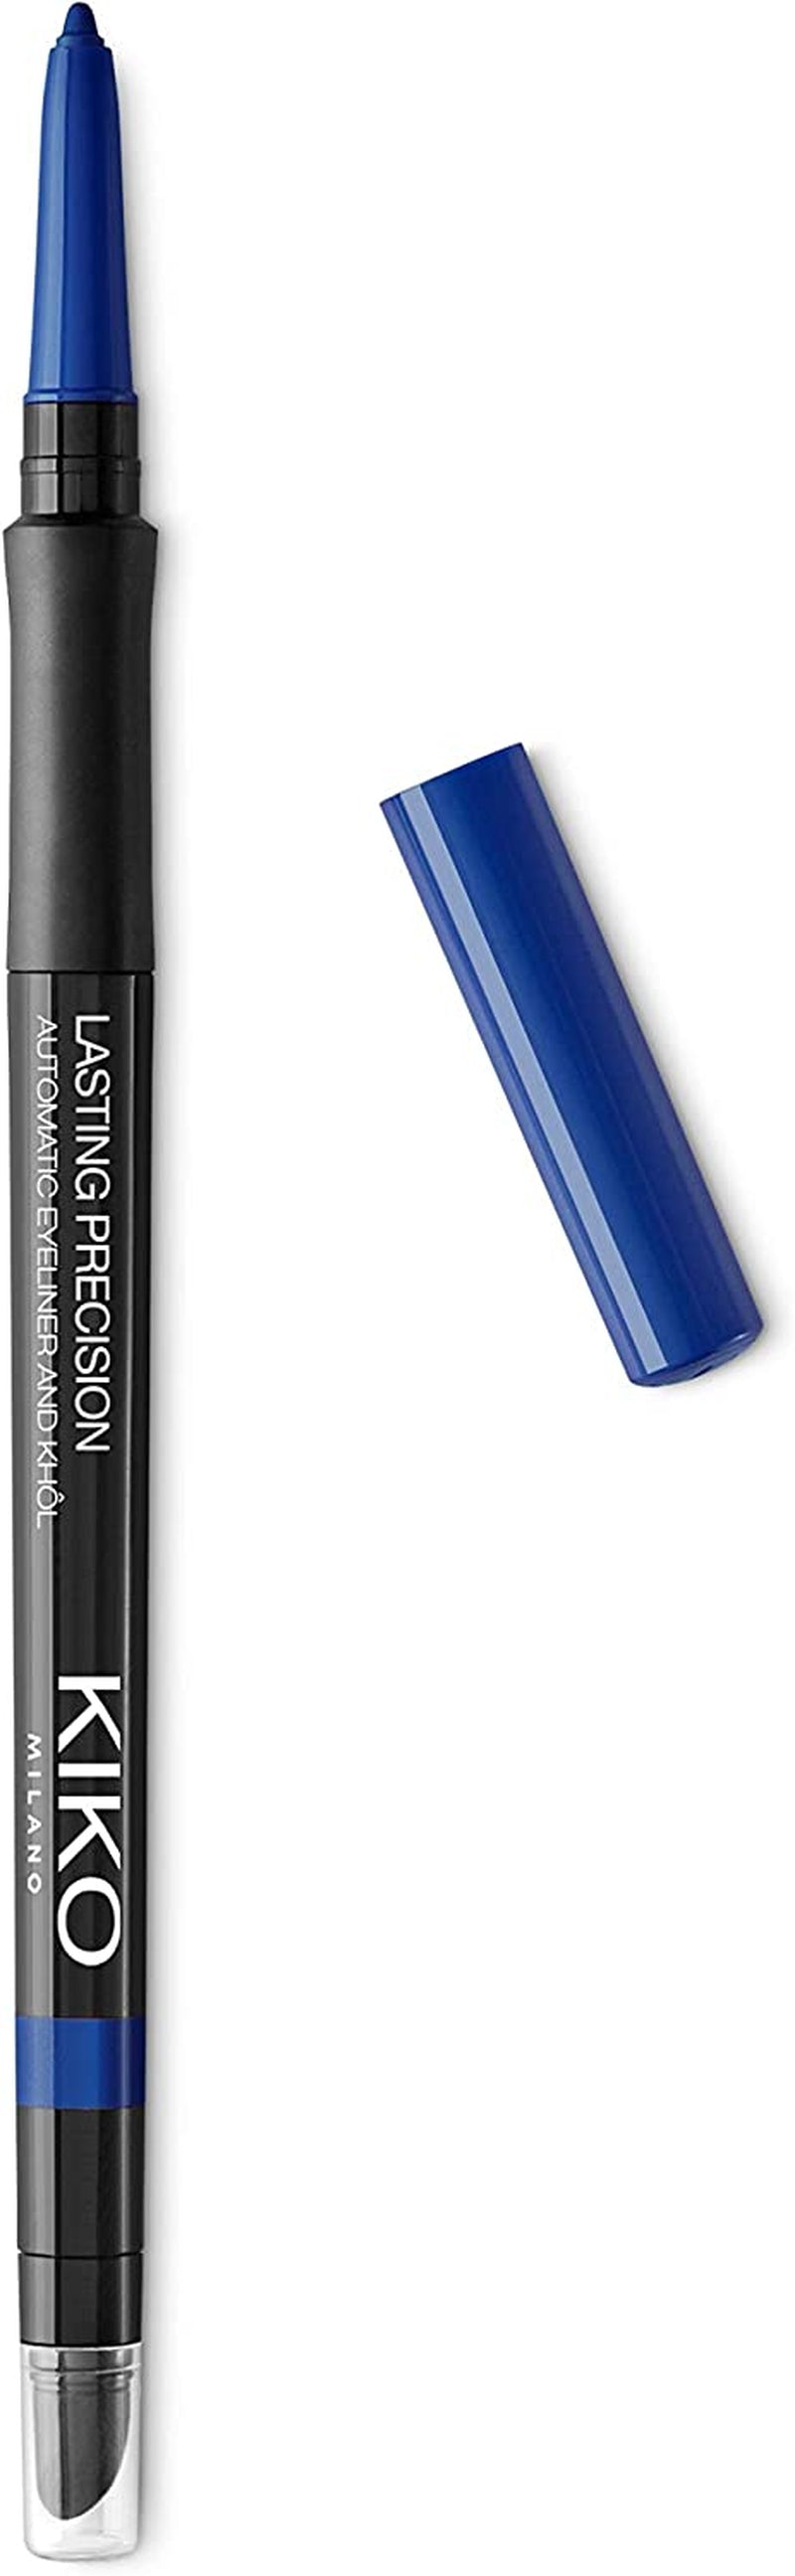 Kiko Milano Lasting Precision Automatic Eyeliner and Khôl 06 | Automatic Eye Pencil for the Waterline and Lash Line